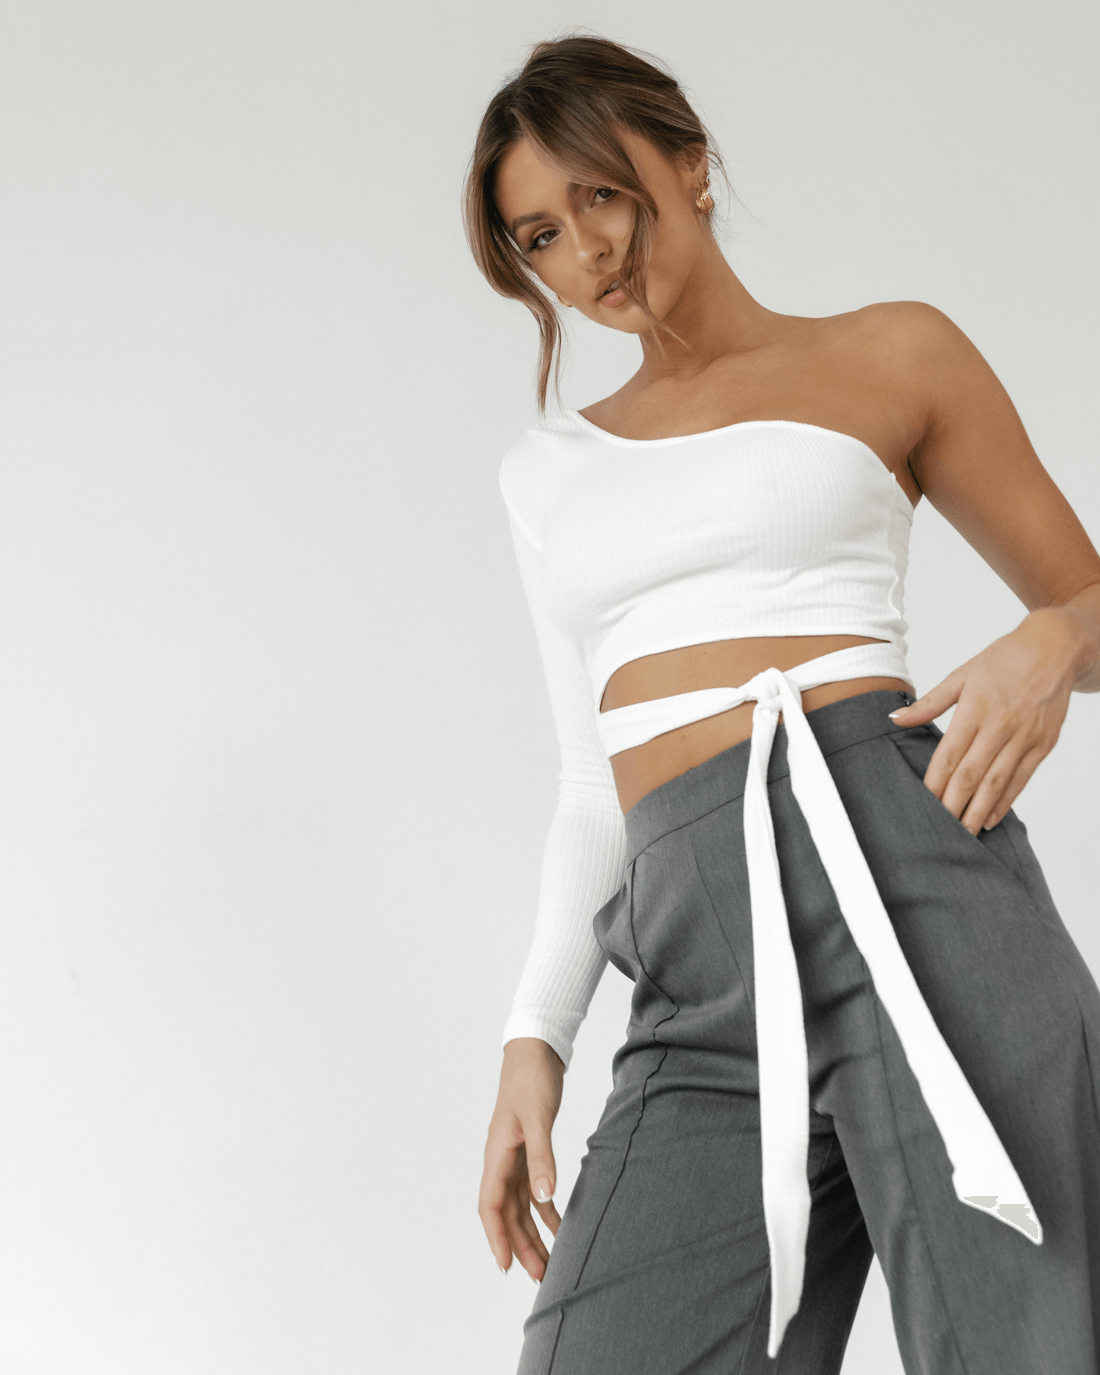 Samaya One Shoulder Top (White) - White One Shoulder Top - Women's Top - Charcoal Clothing